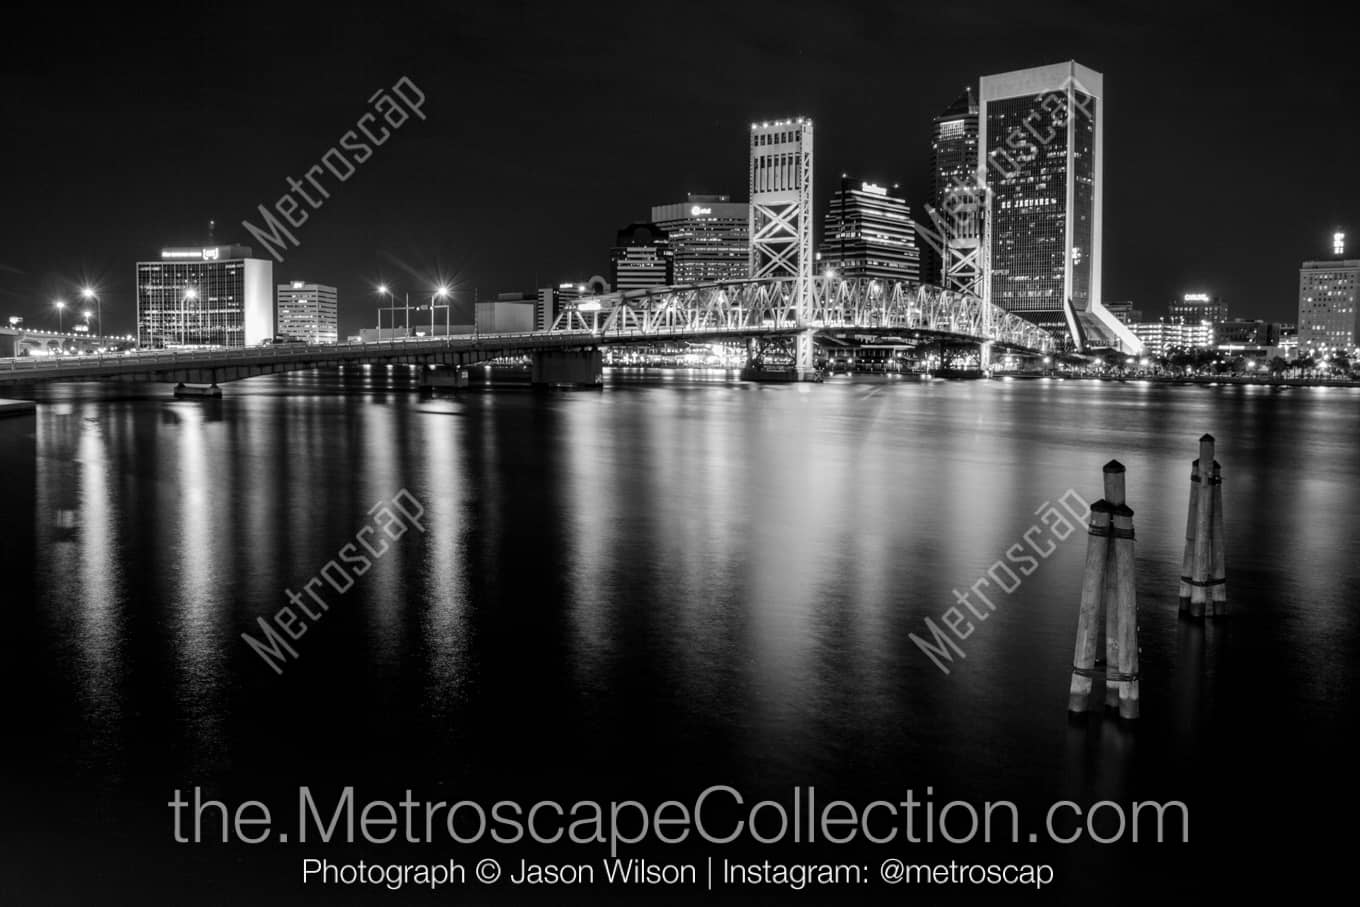 Jacksonville Florida Picture at Night